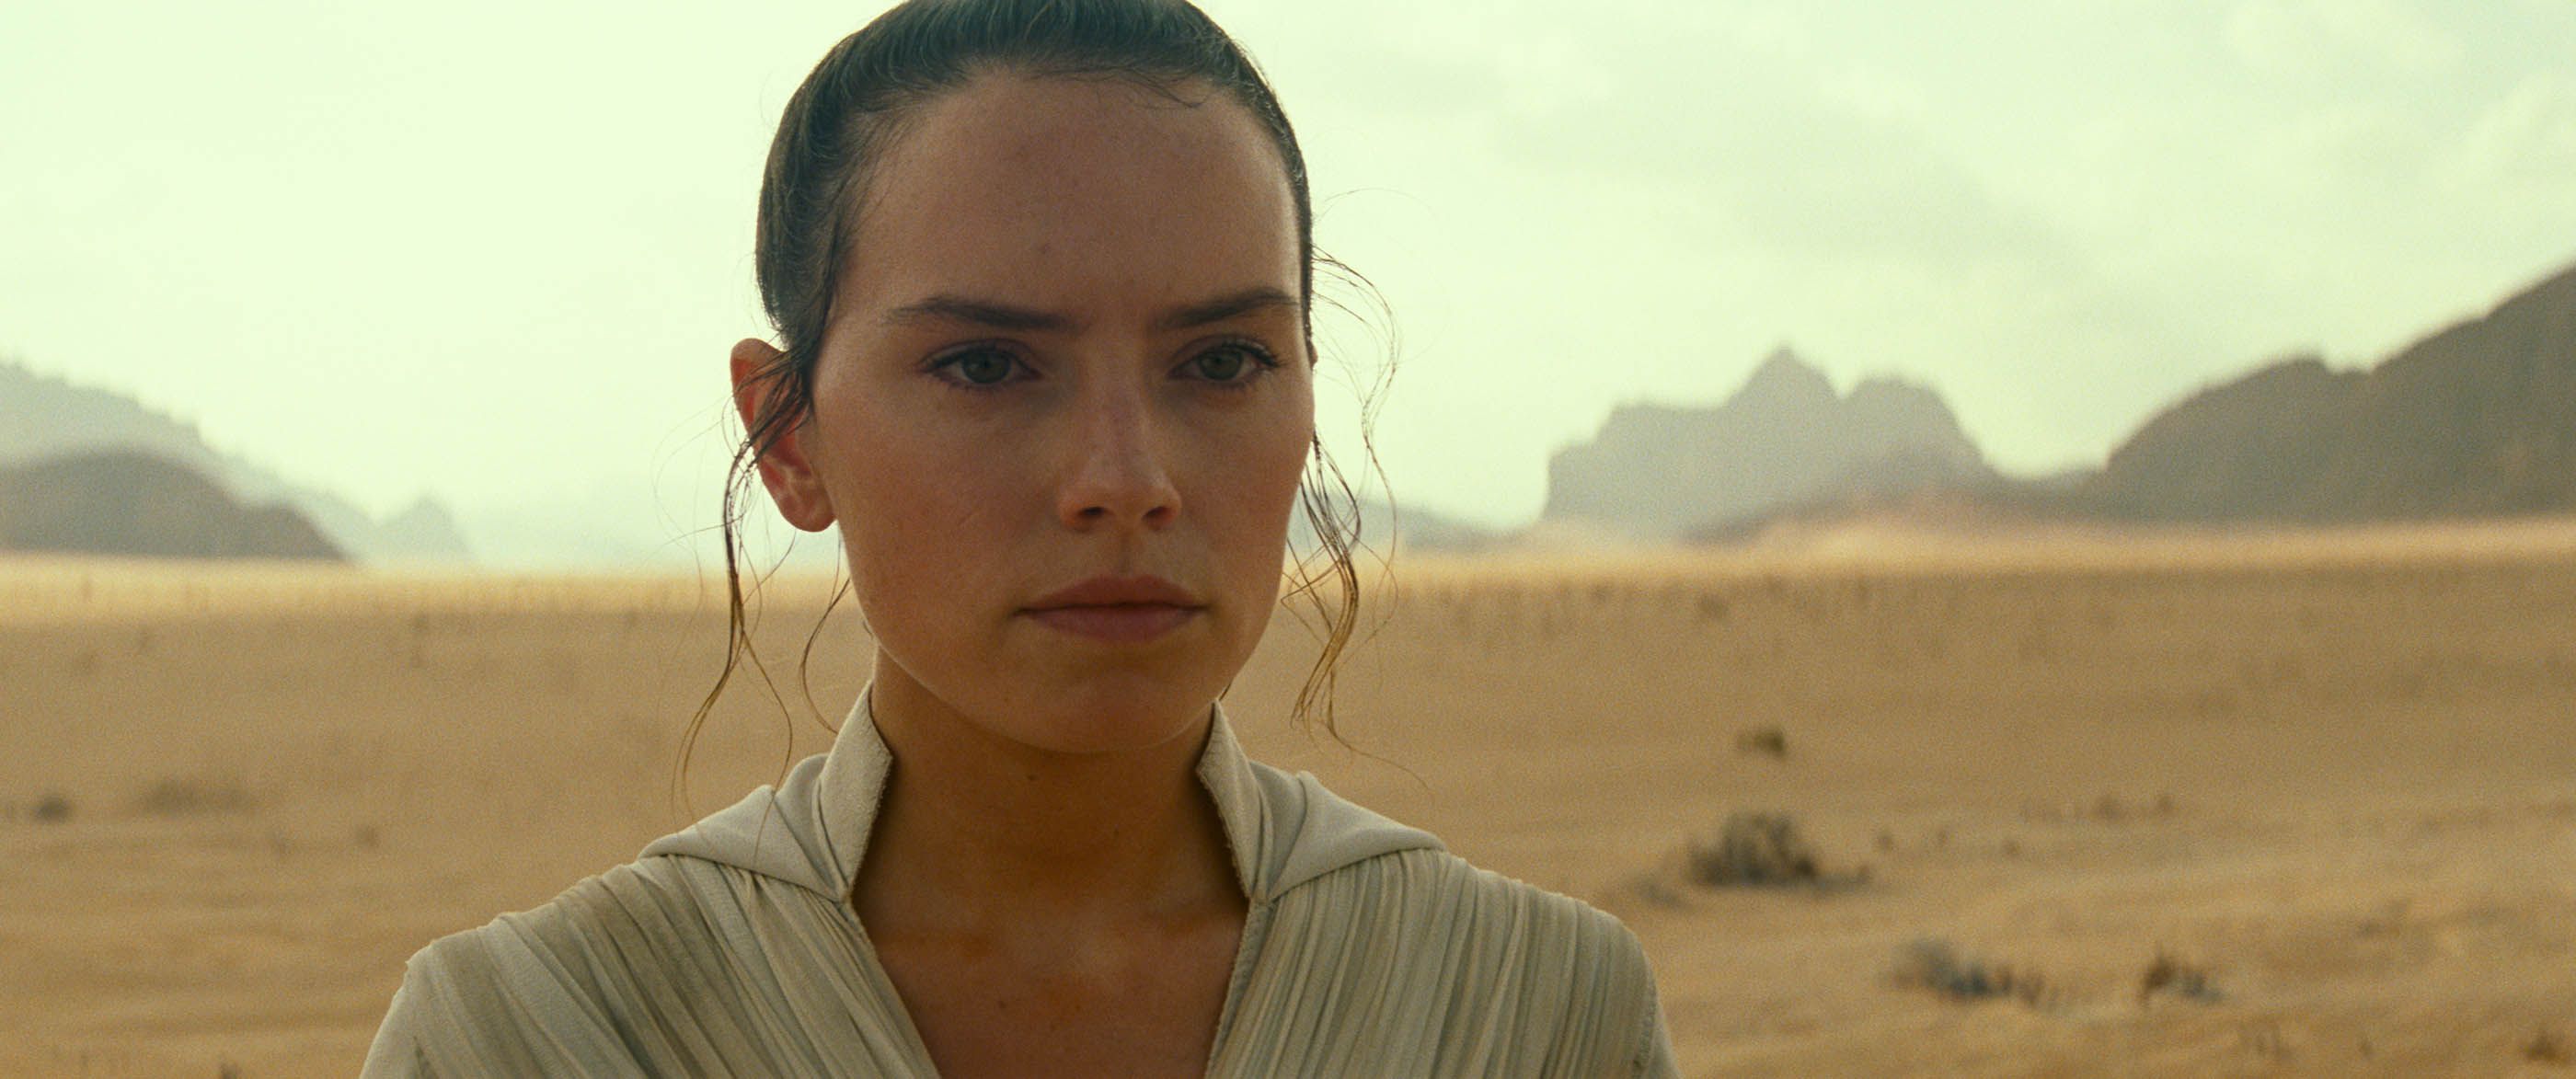 Rey Yellow Lightsaber Meaning's What Rey's New Lightsaber in the Rise of Skywalker Means For Star Wars